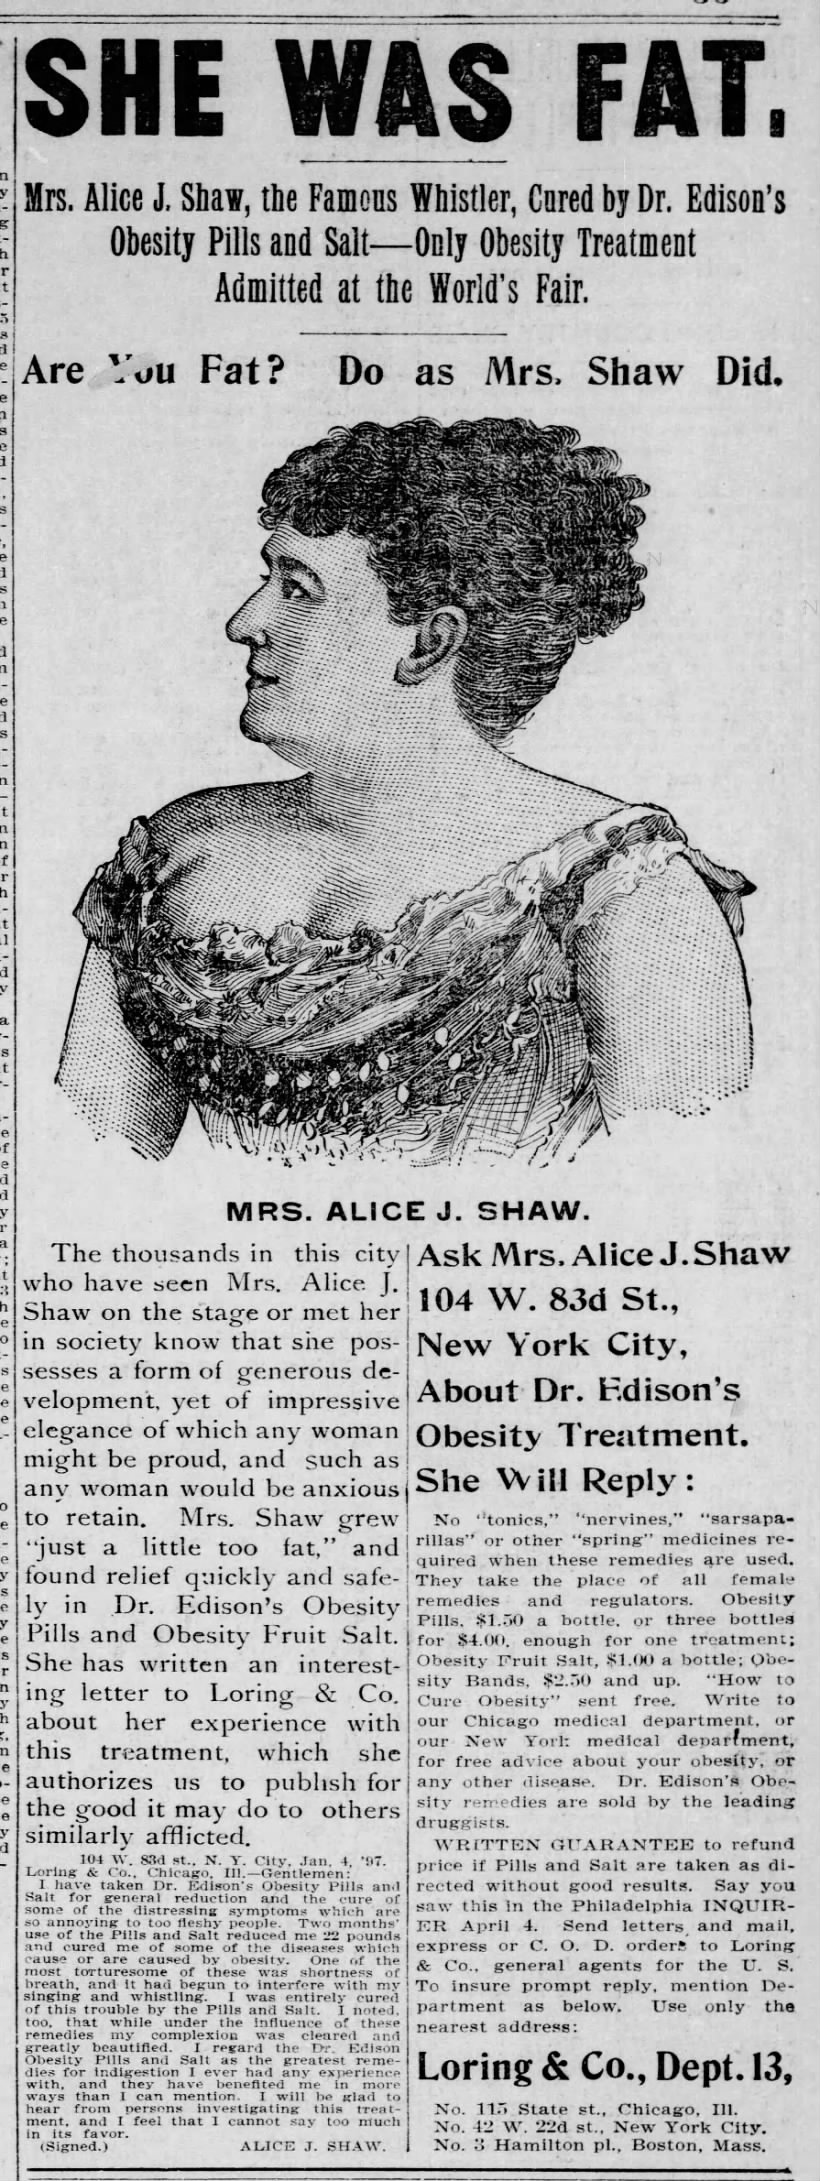 "She Was Fat" ad: Alice J. Shaw as celebrity weight-loss spokeswoman (1897).